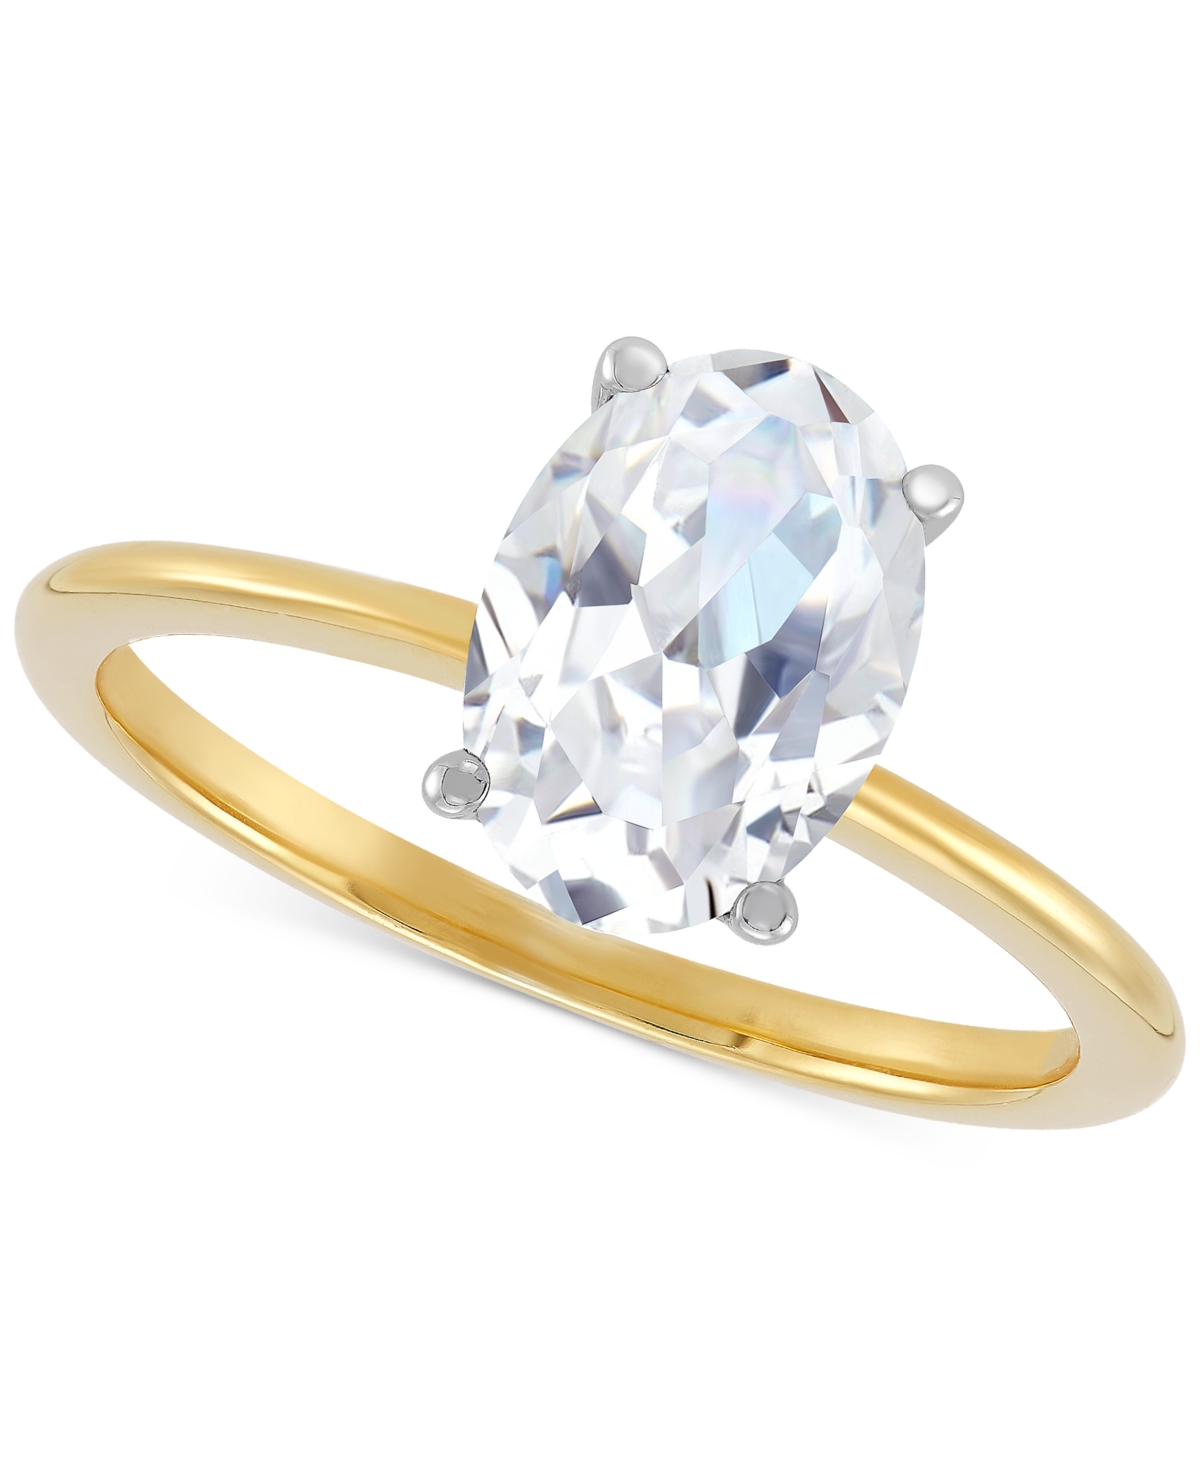 Grown With Love Igi Certified Lab Grown Diamond Oval Solitaire Engagement Ring in 14k Gold